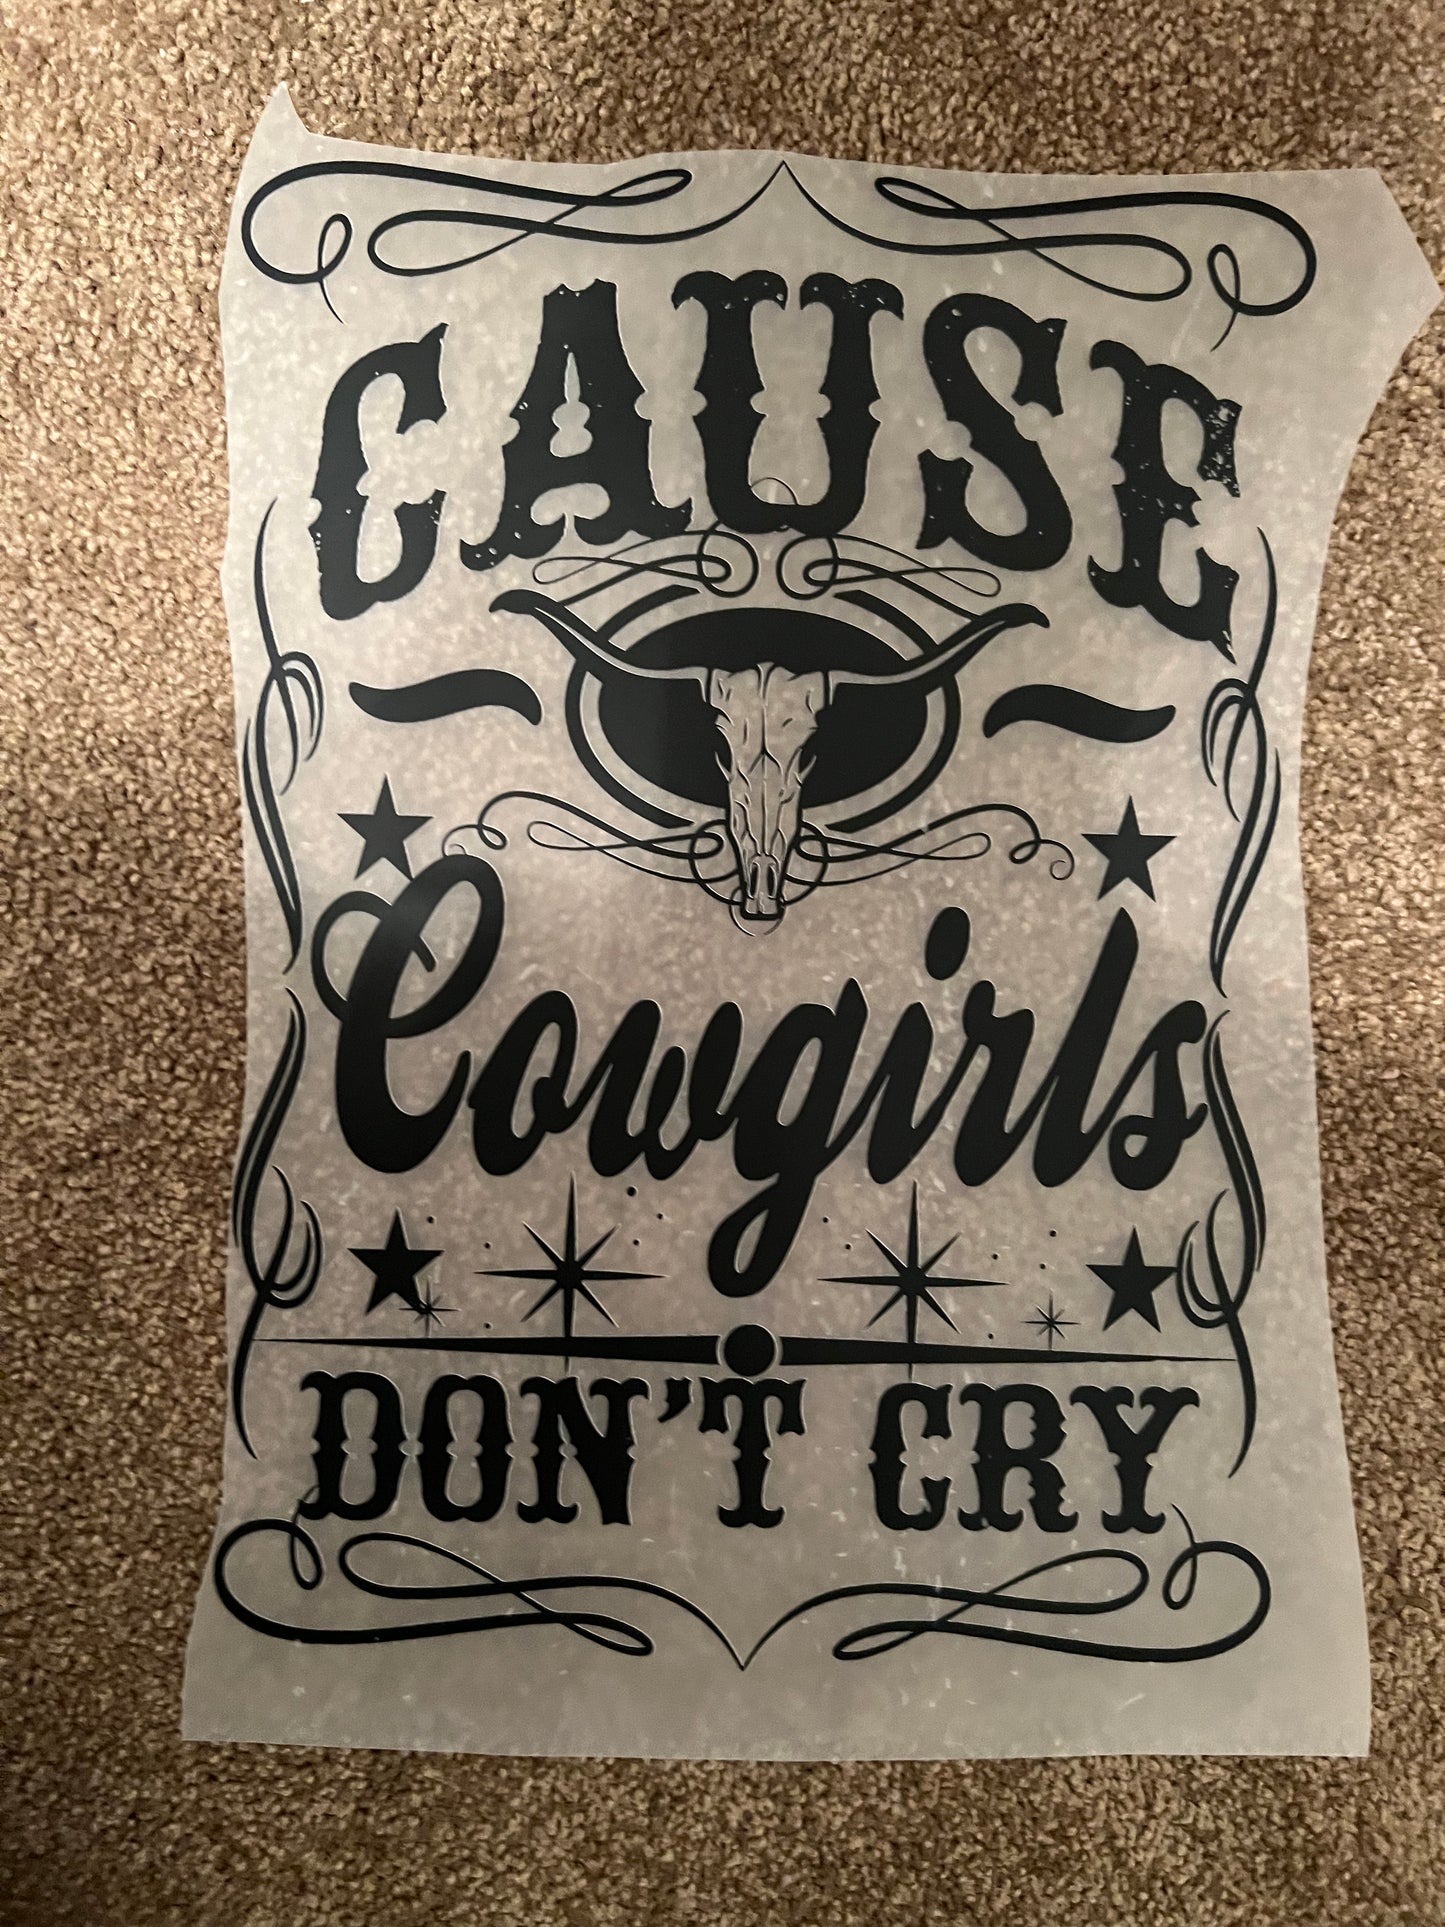 Cause cowgirls don’t cry